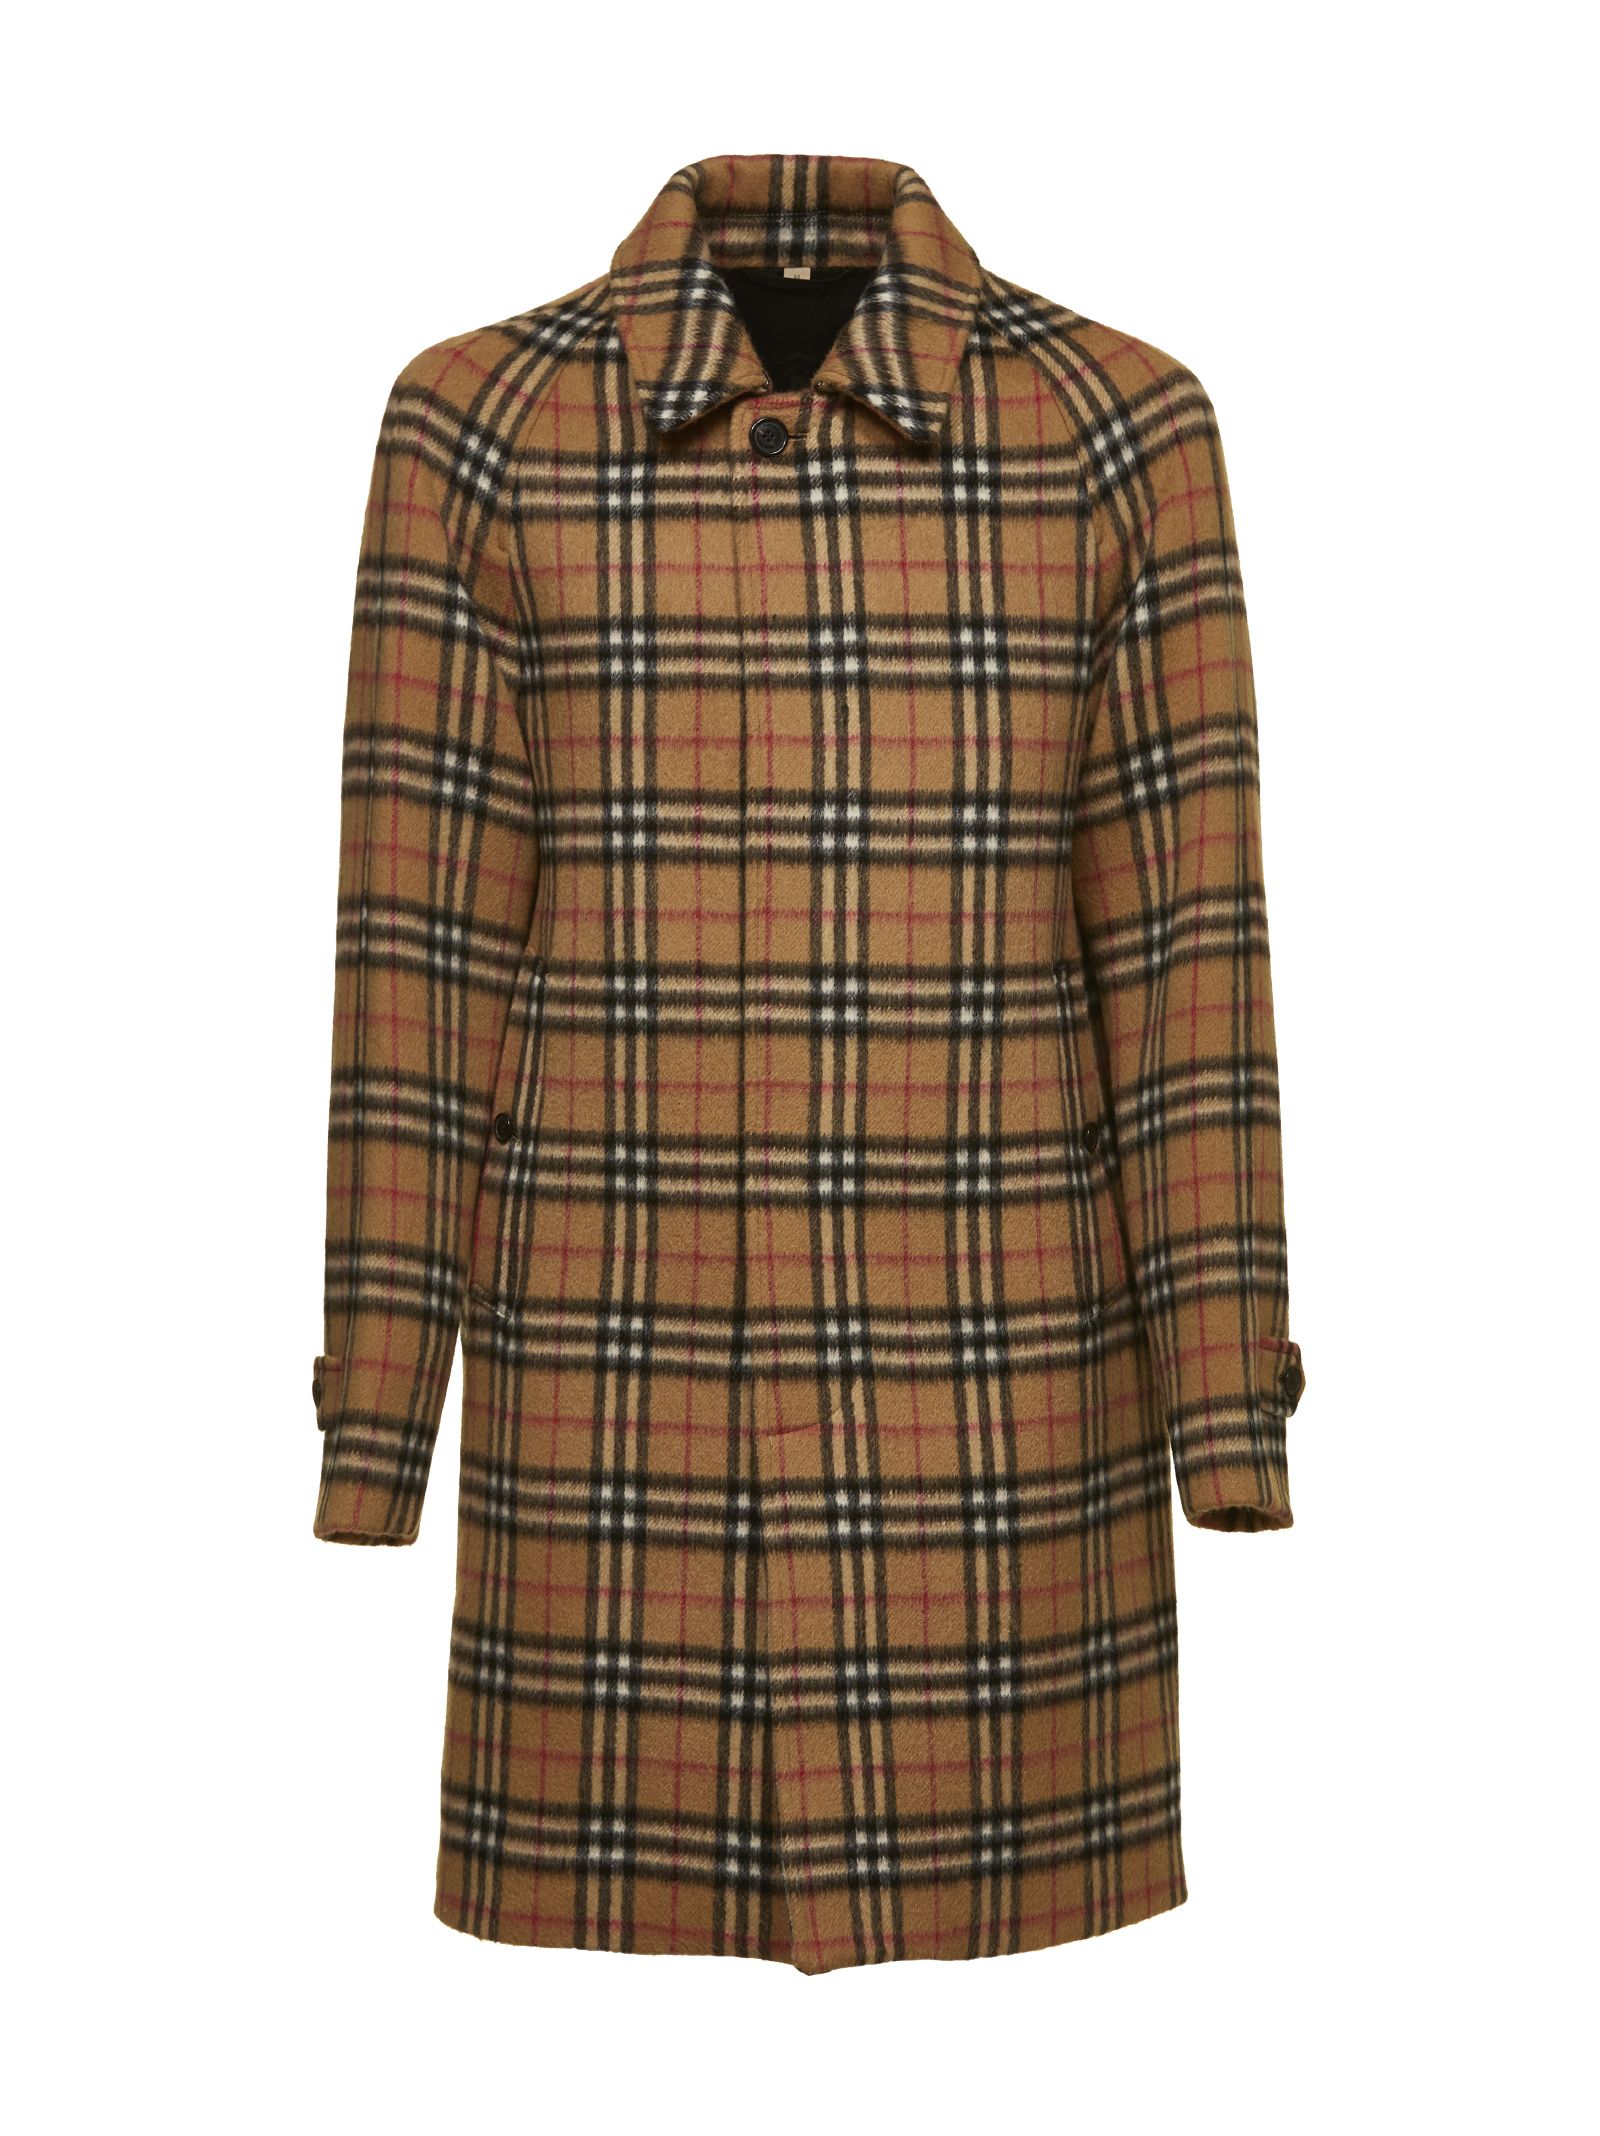 Burberry Burberry Vintage Check Car Coat - Check - 10671176 | italist